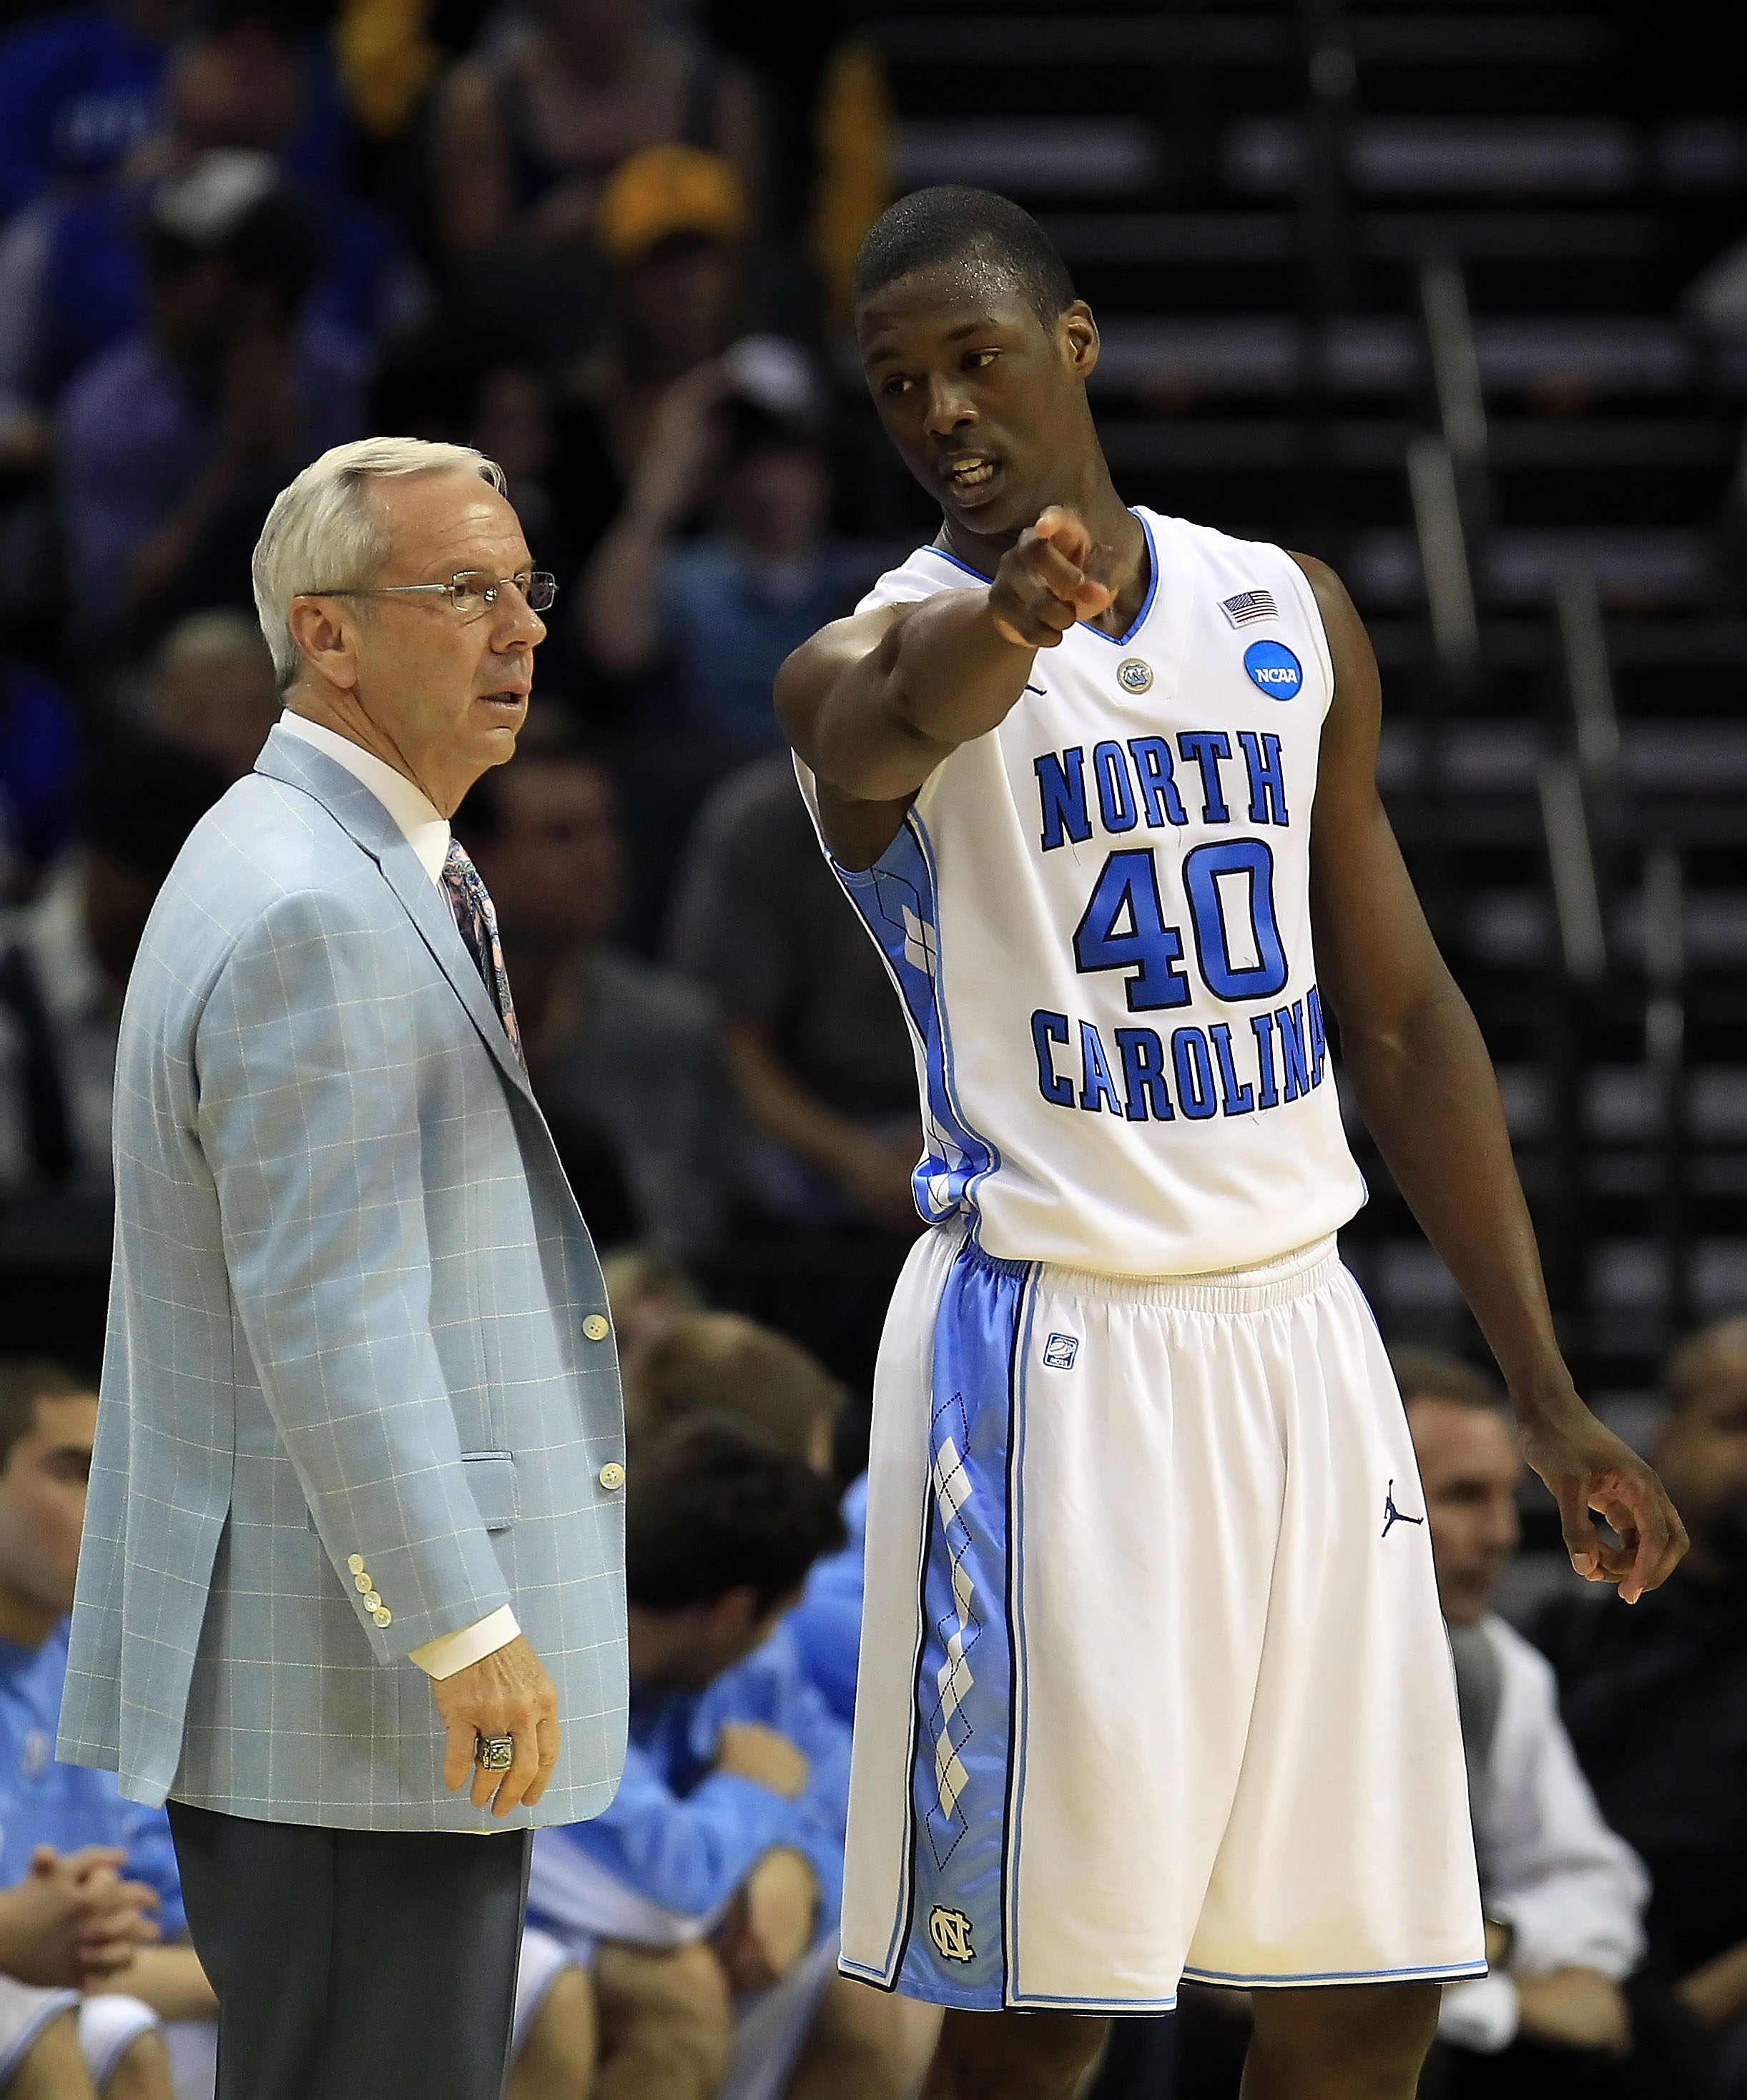 Harrison Barnes Returns to UNC: 5 Reasons It's the Right Move